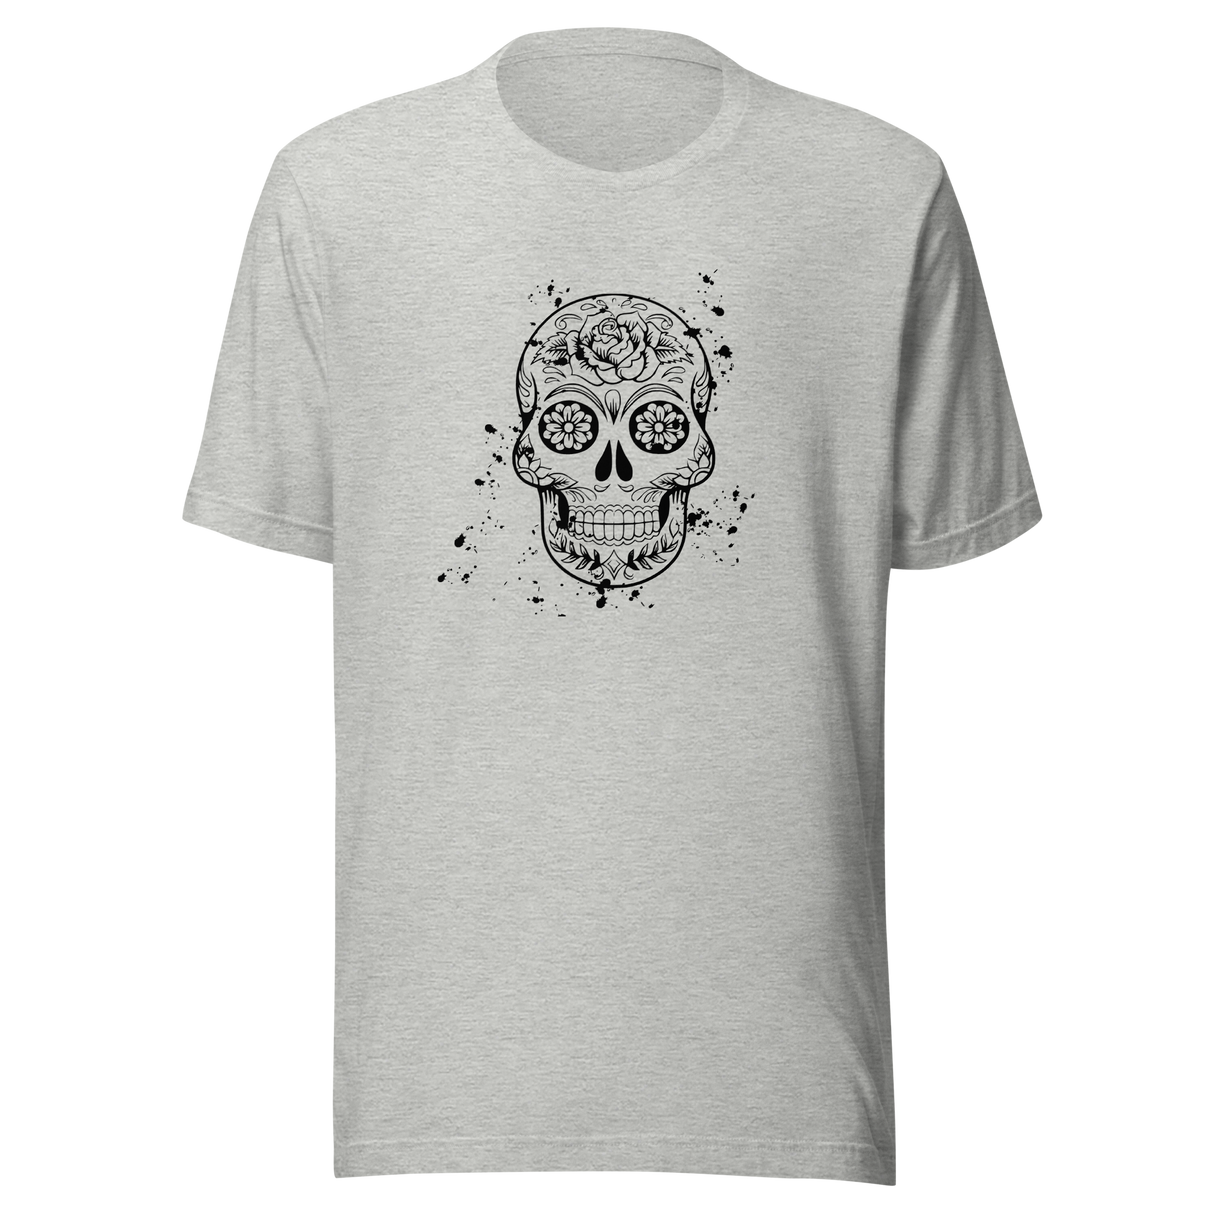 psychedelic-skull-black-and-white-skull-tee-psychedelic-t-shirt-halloween-tee-gift-t-shirt-cool-tee#color_athletic-heather